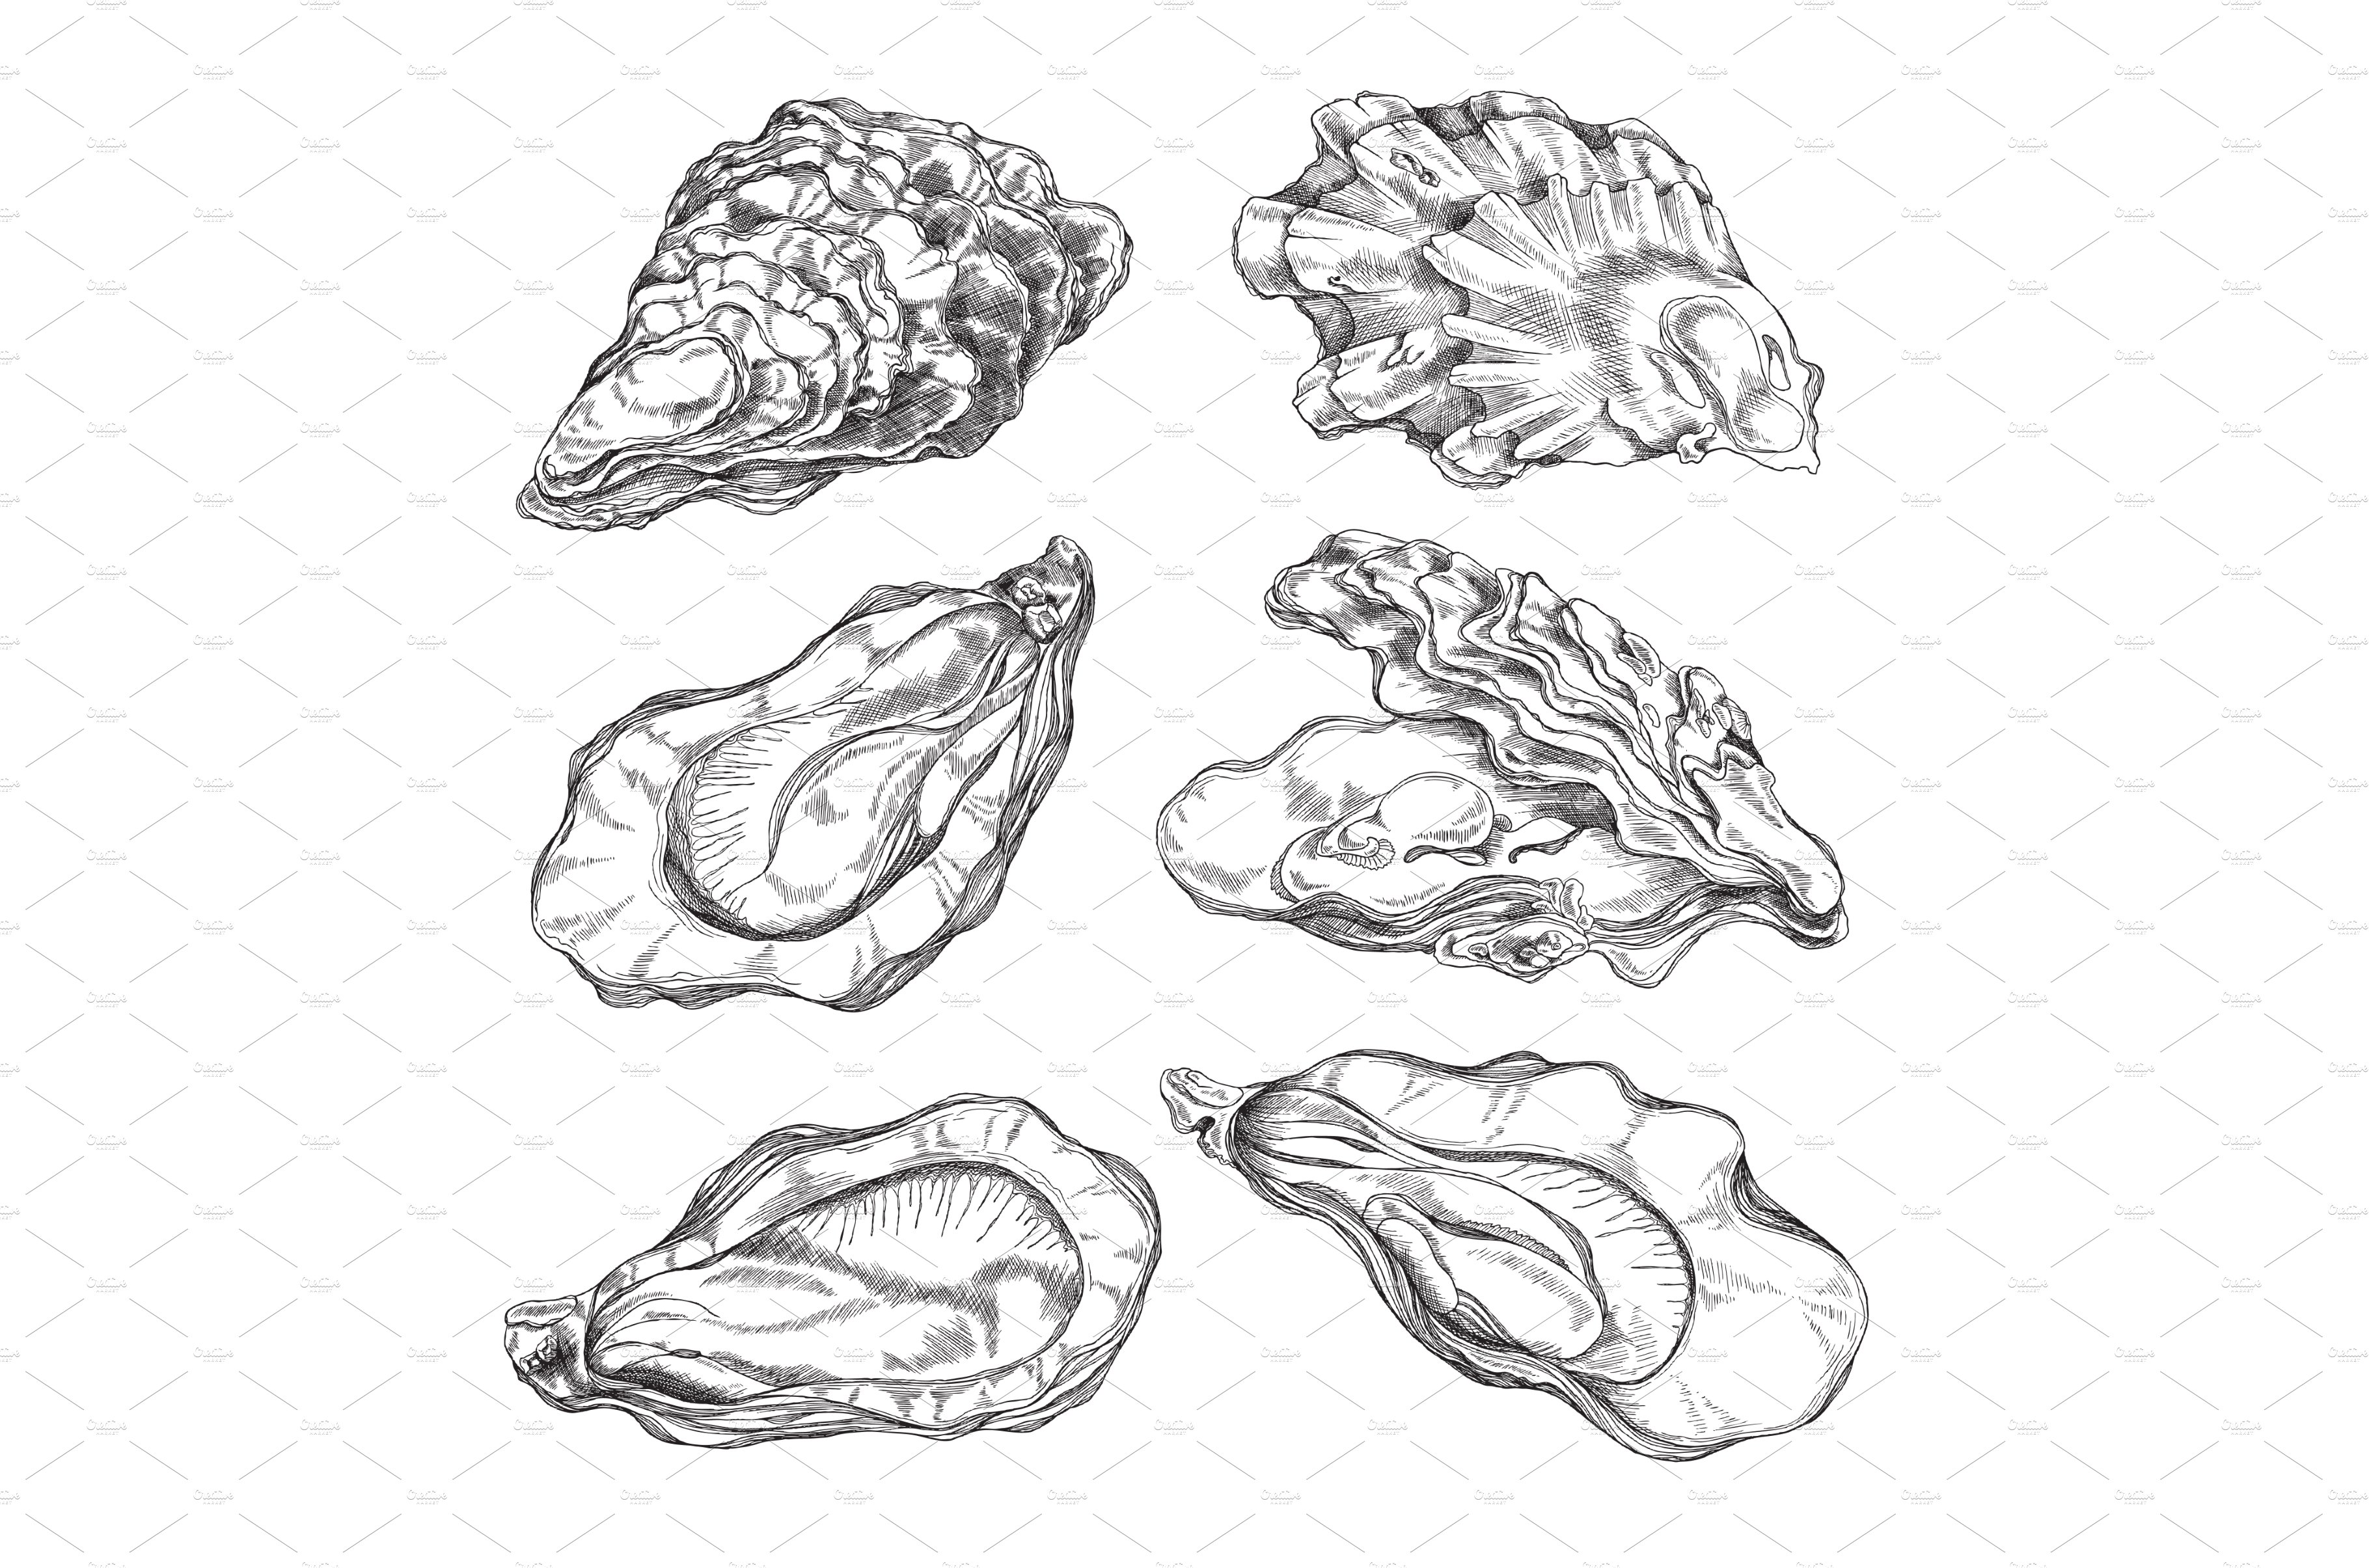 Oyster shells with edible mollusk cover image.